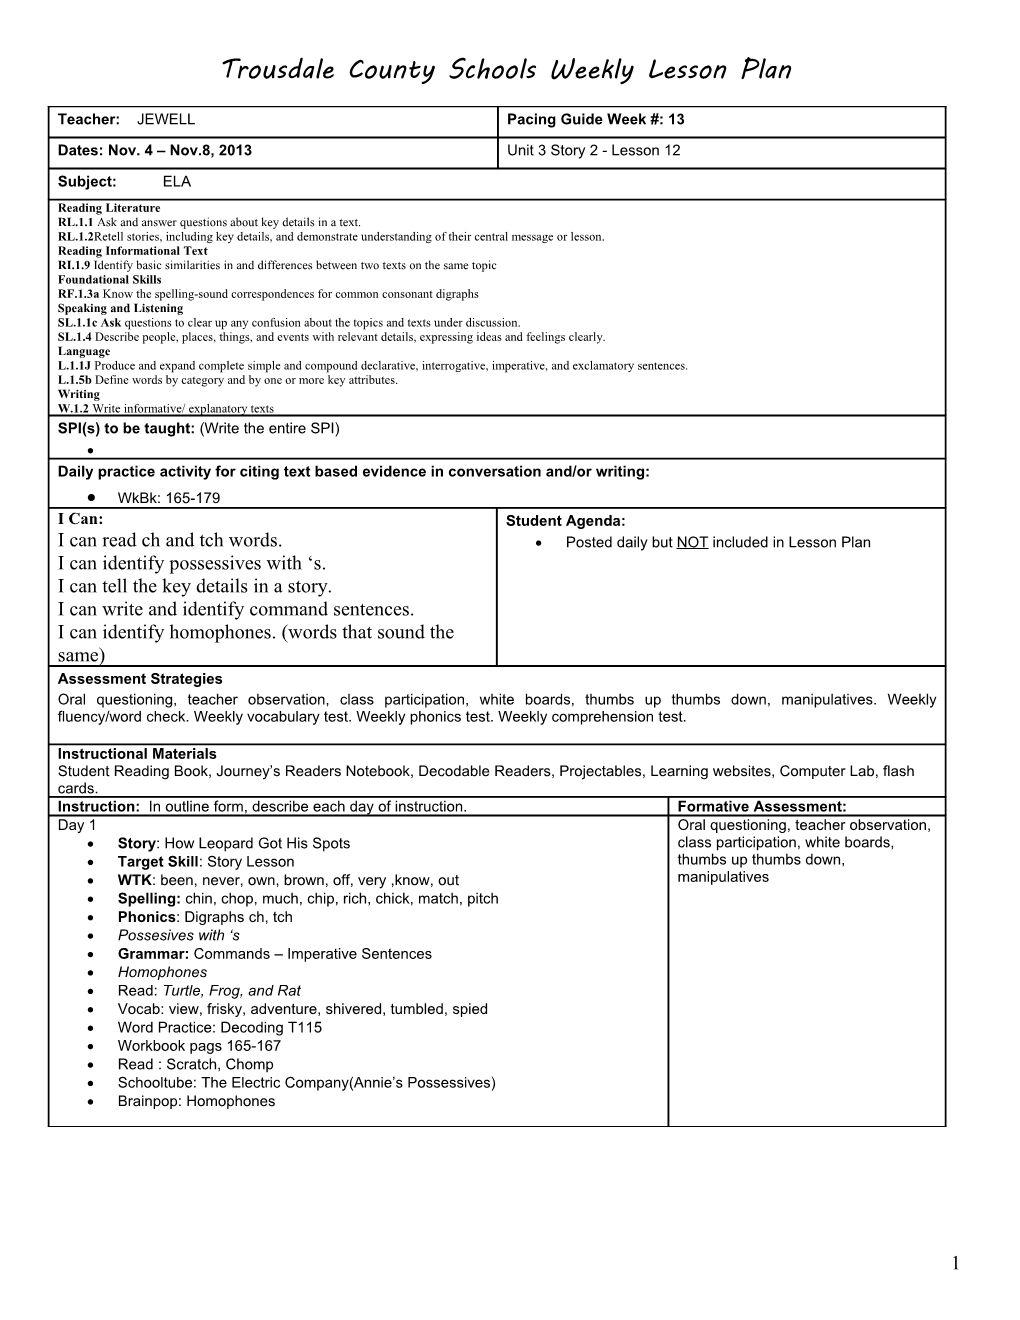 Lesson Plan Template s20